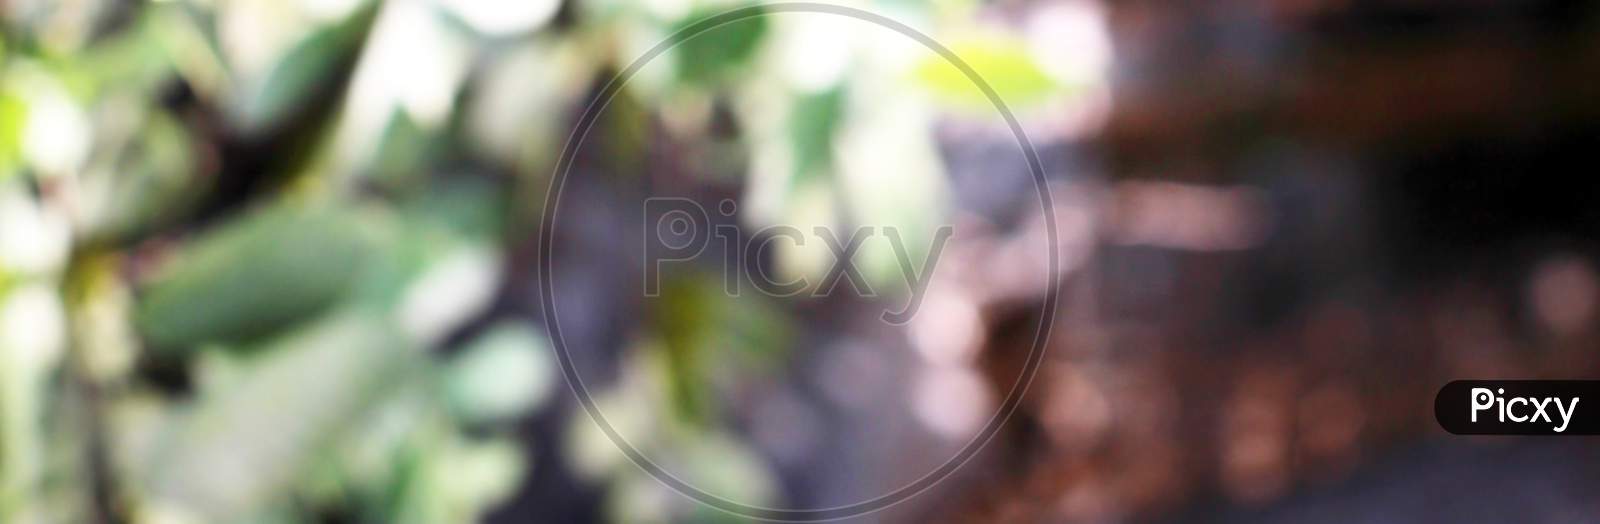 Nature Tree Leaf Abstract Defocused Blurry Texture Background.